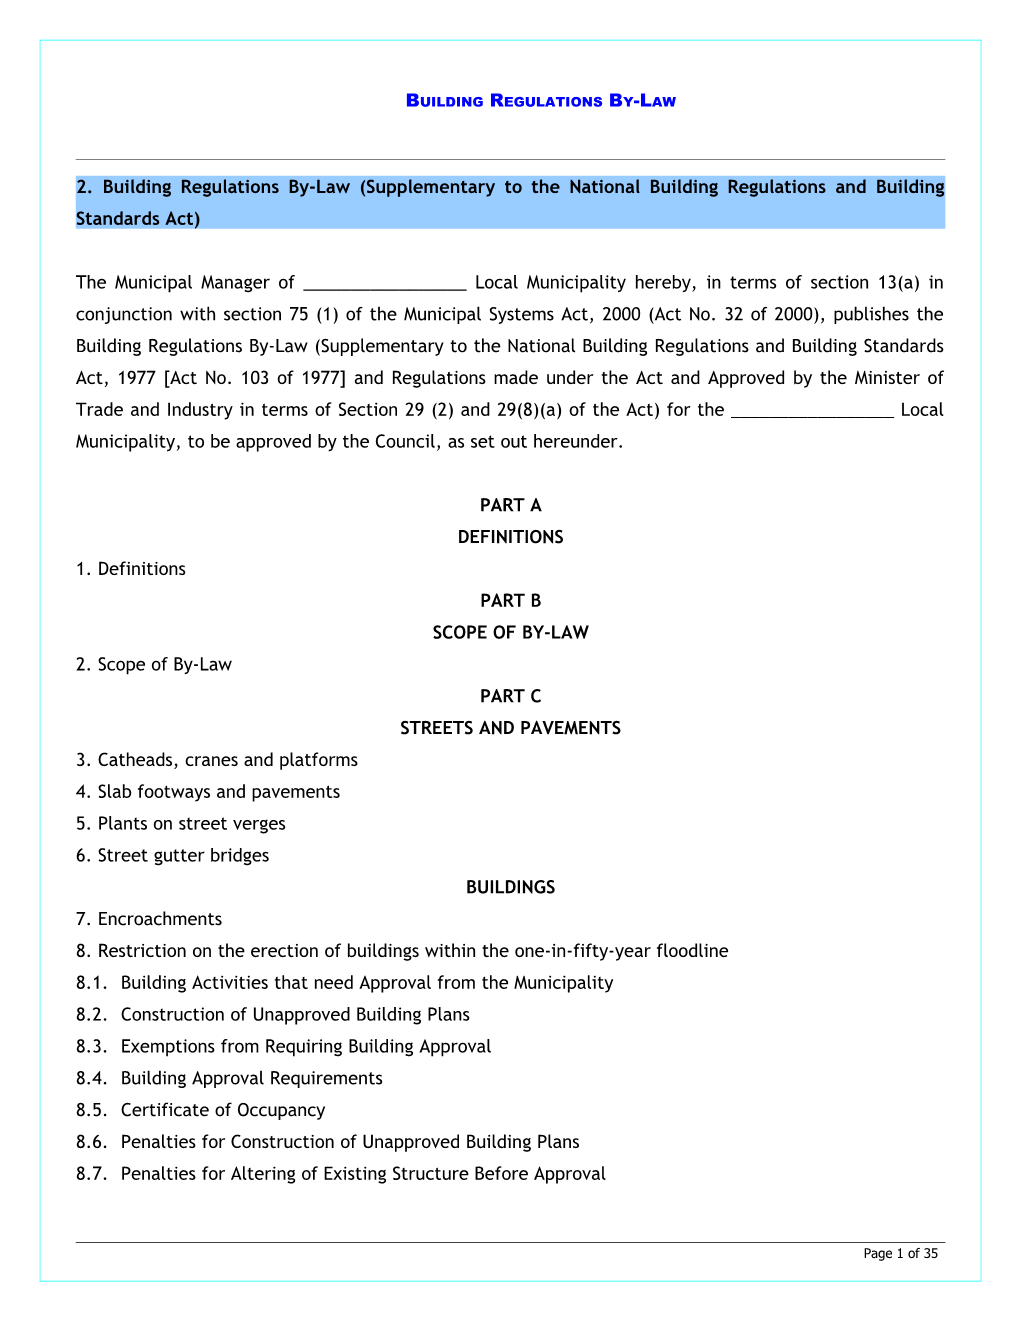 2. Building Regulations By-Law (Supplementary to the Nationalbuilding Regulations And